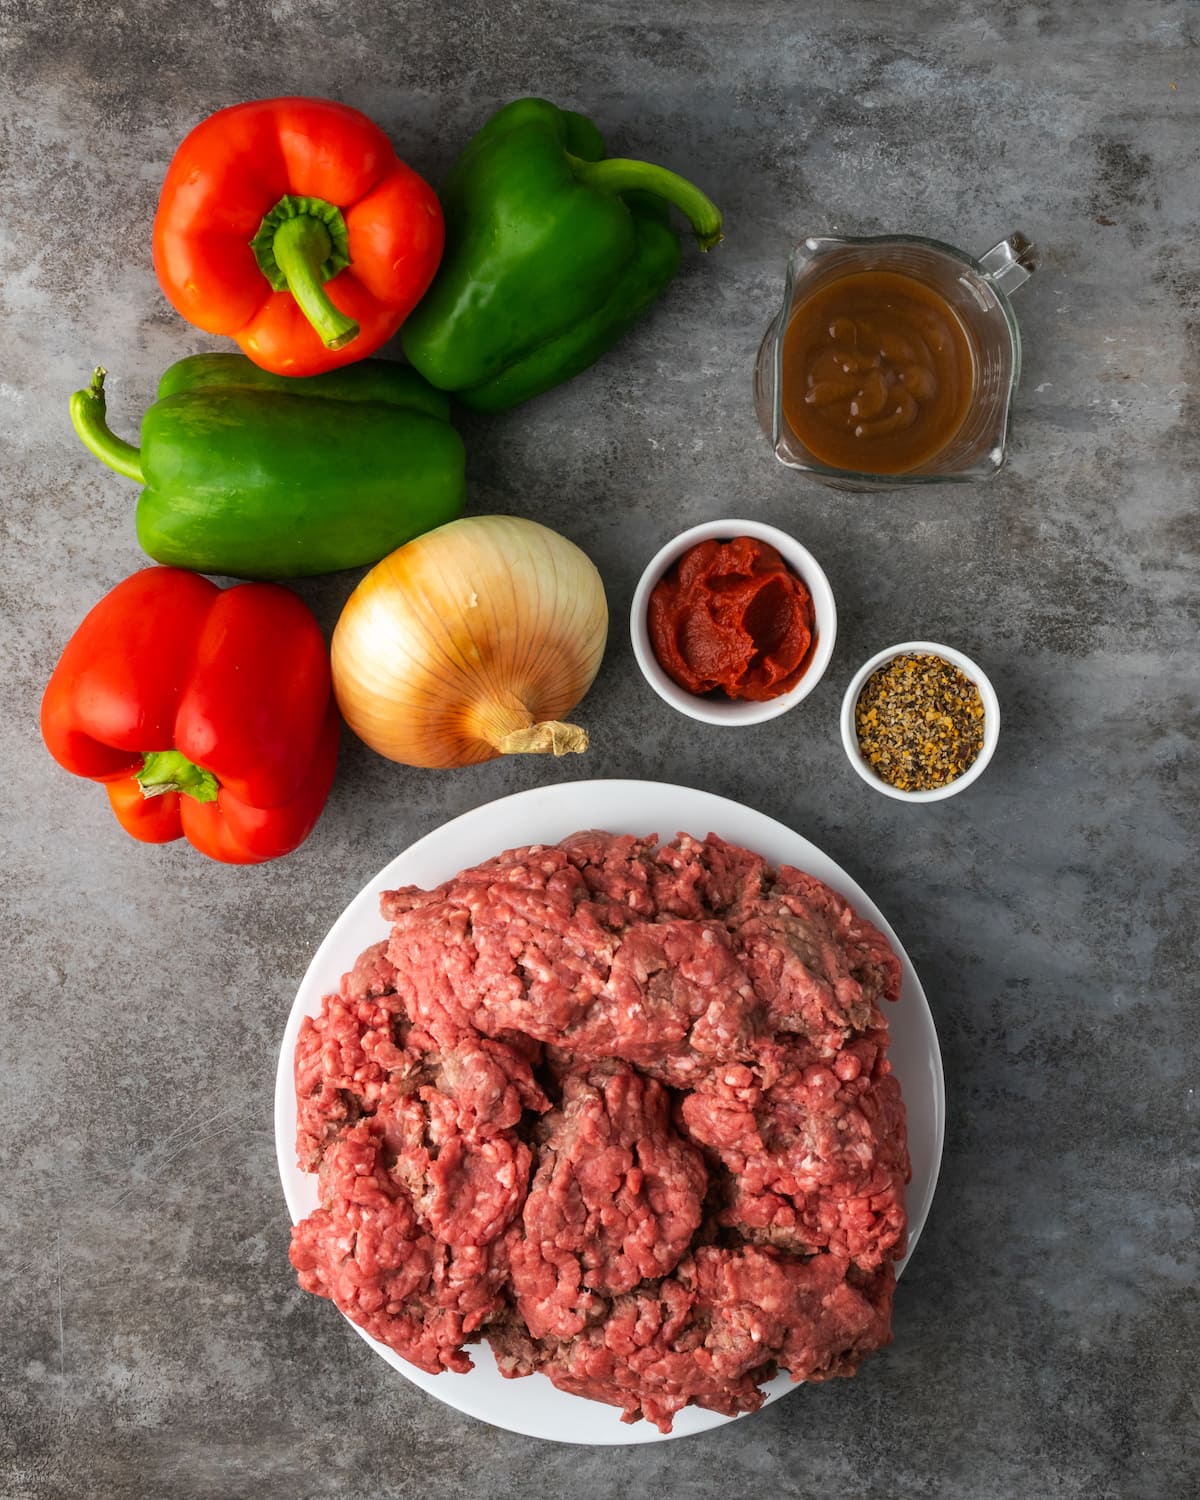 The ingredients for Crock Pot Philly Cheesesteak Sloppy Joes.